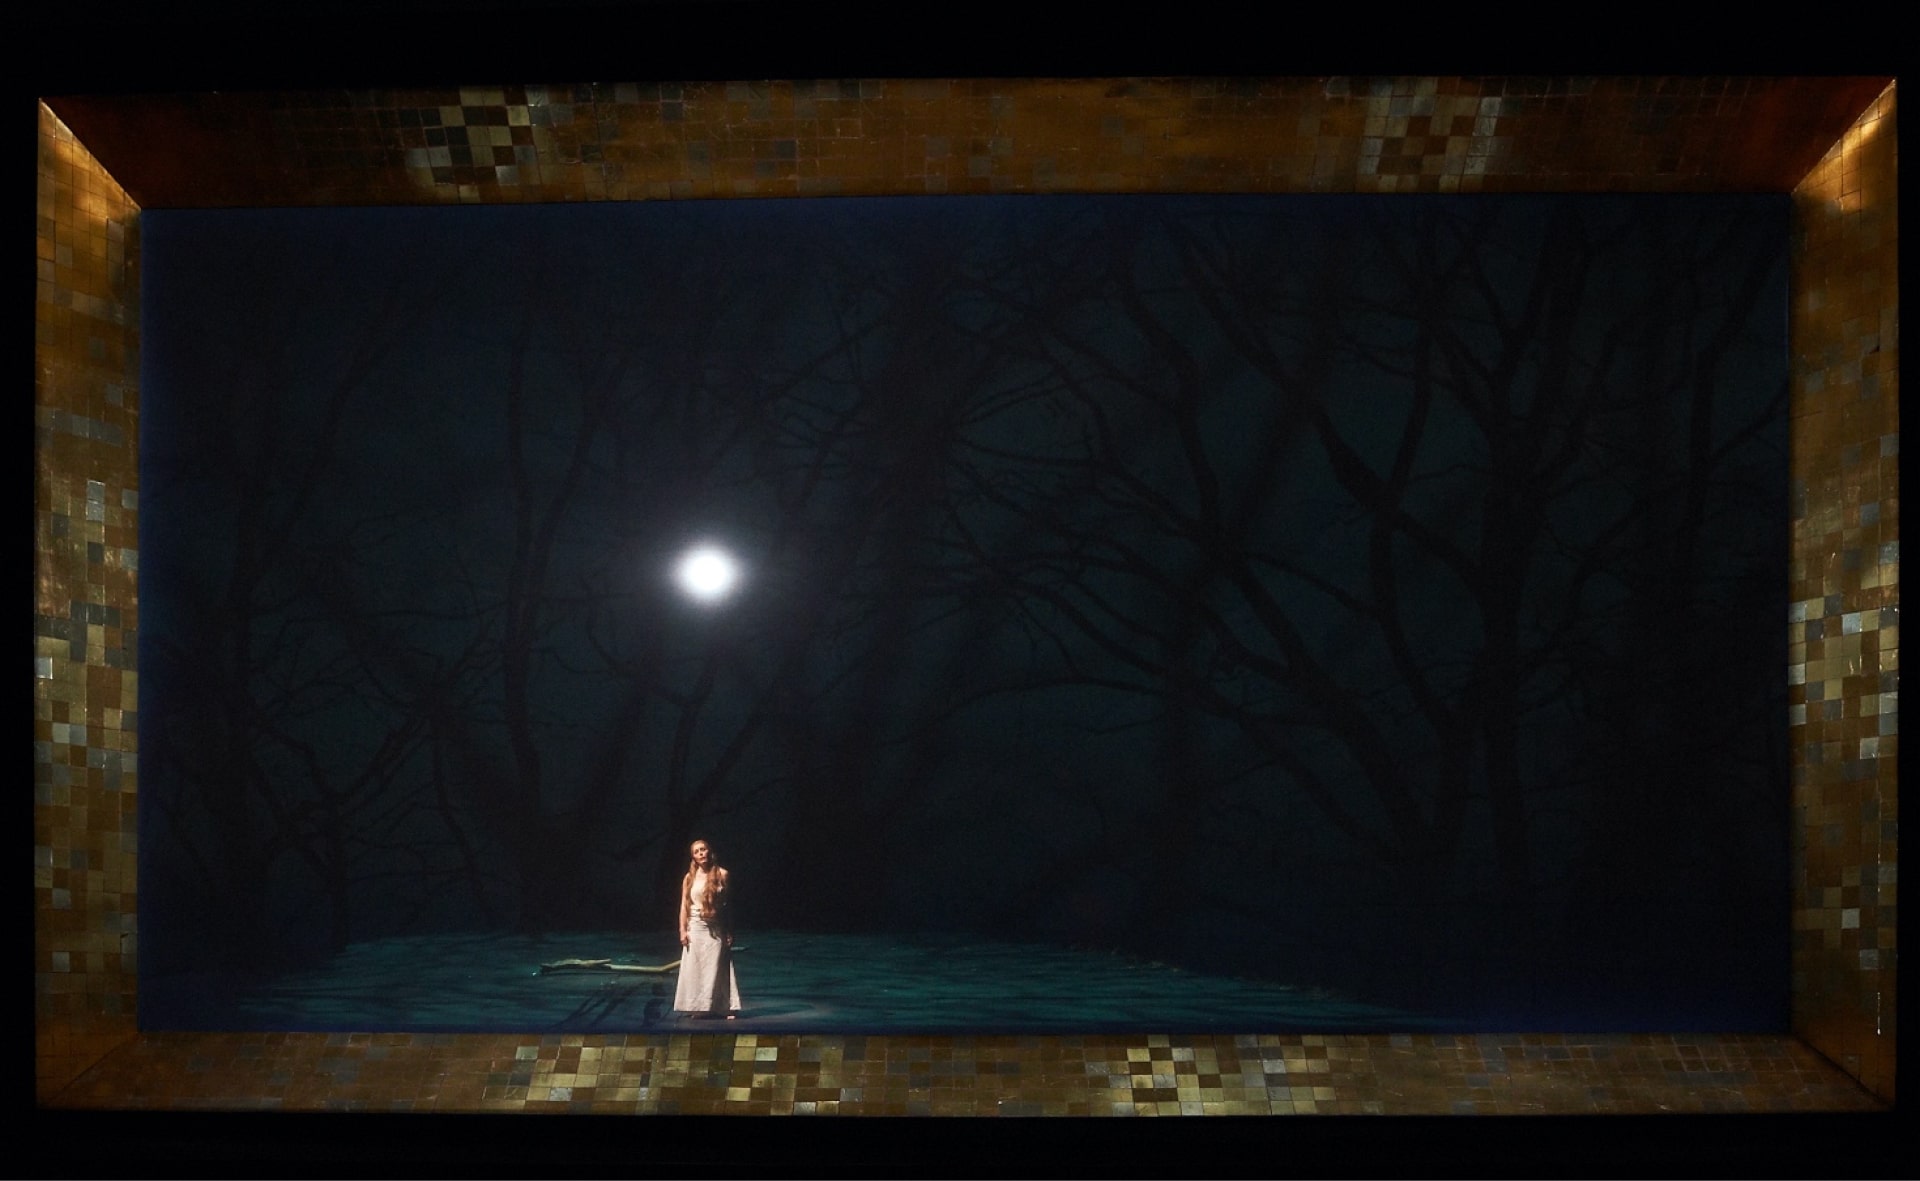 Woman in white stands in projected green forest under gleaming moon, behind gold-tiled frame.